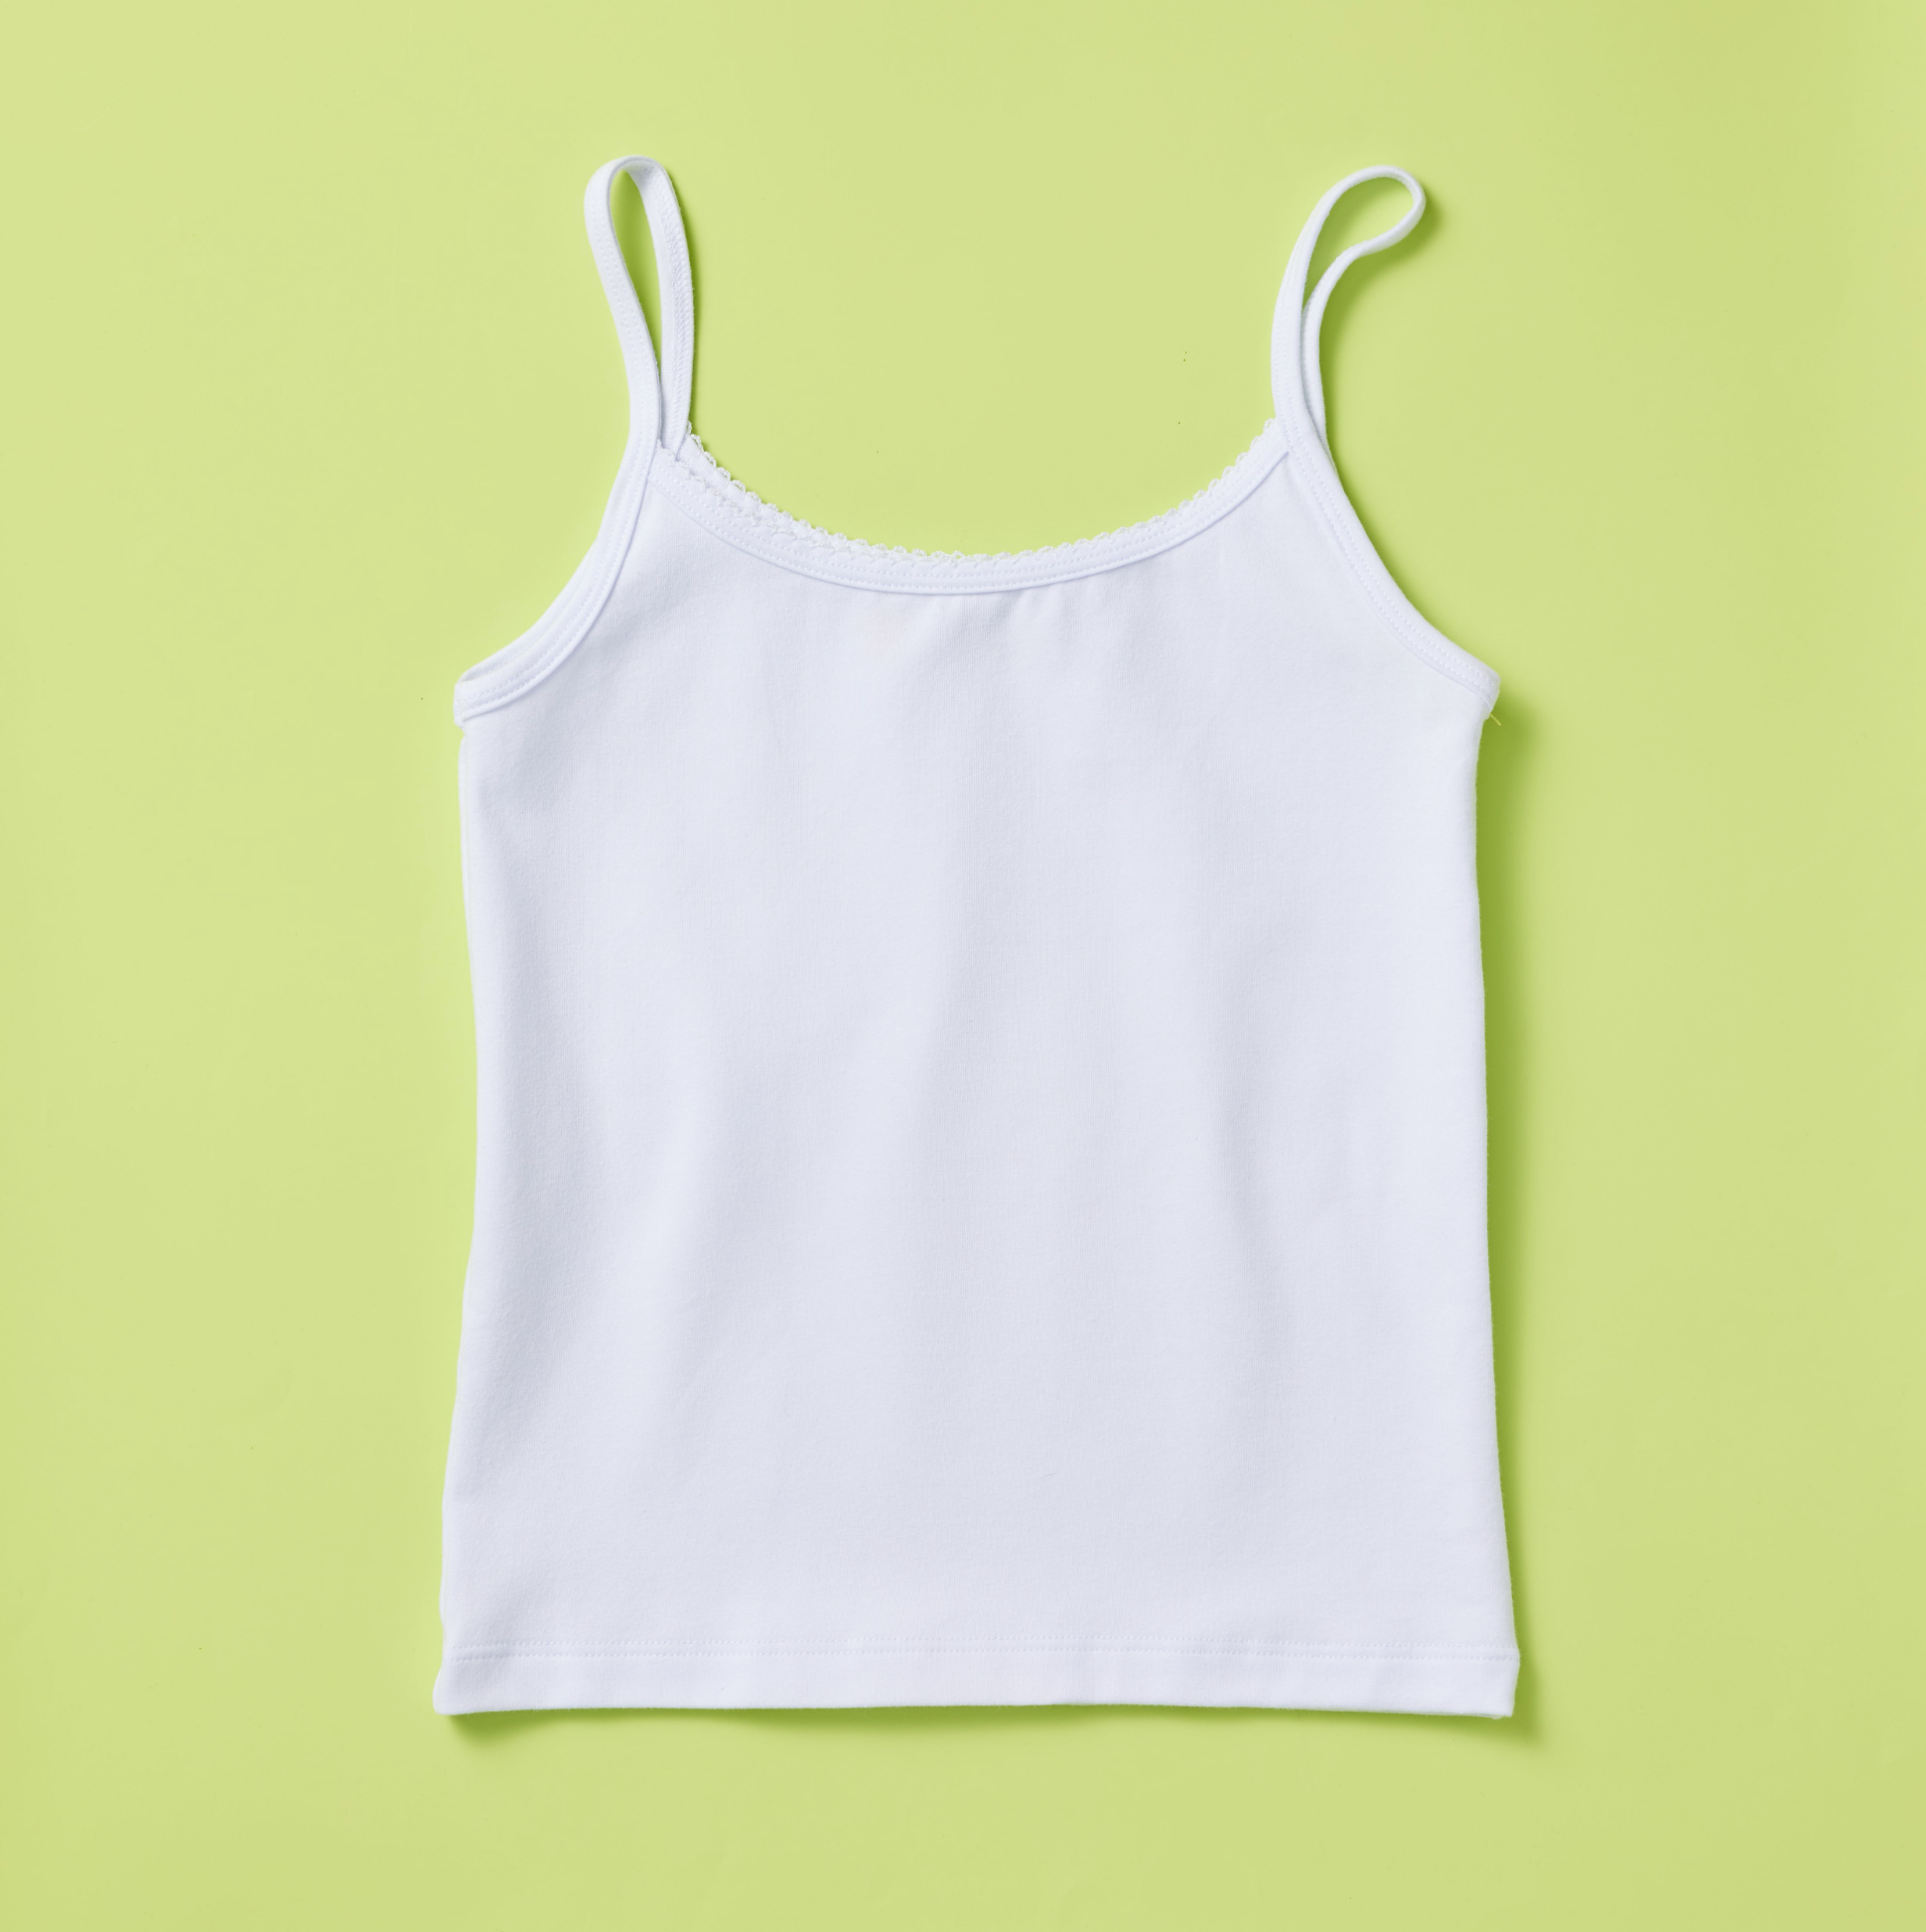 Comfort Seamless Double Strap Cotton Cami, Camisoles